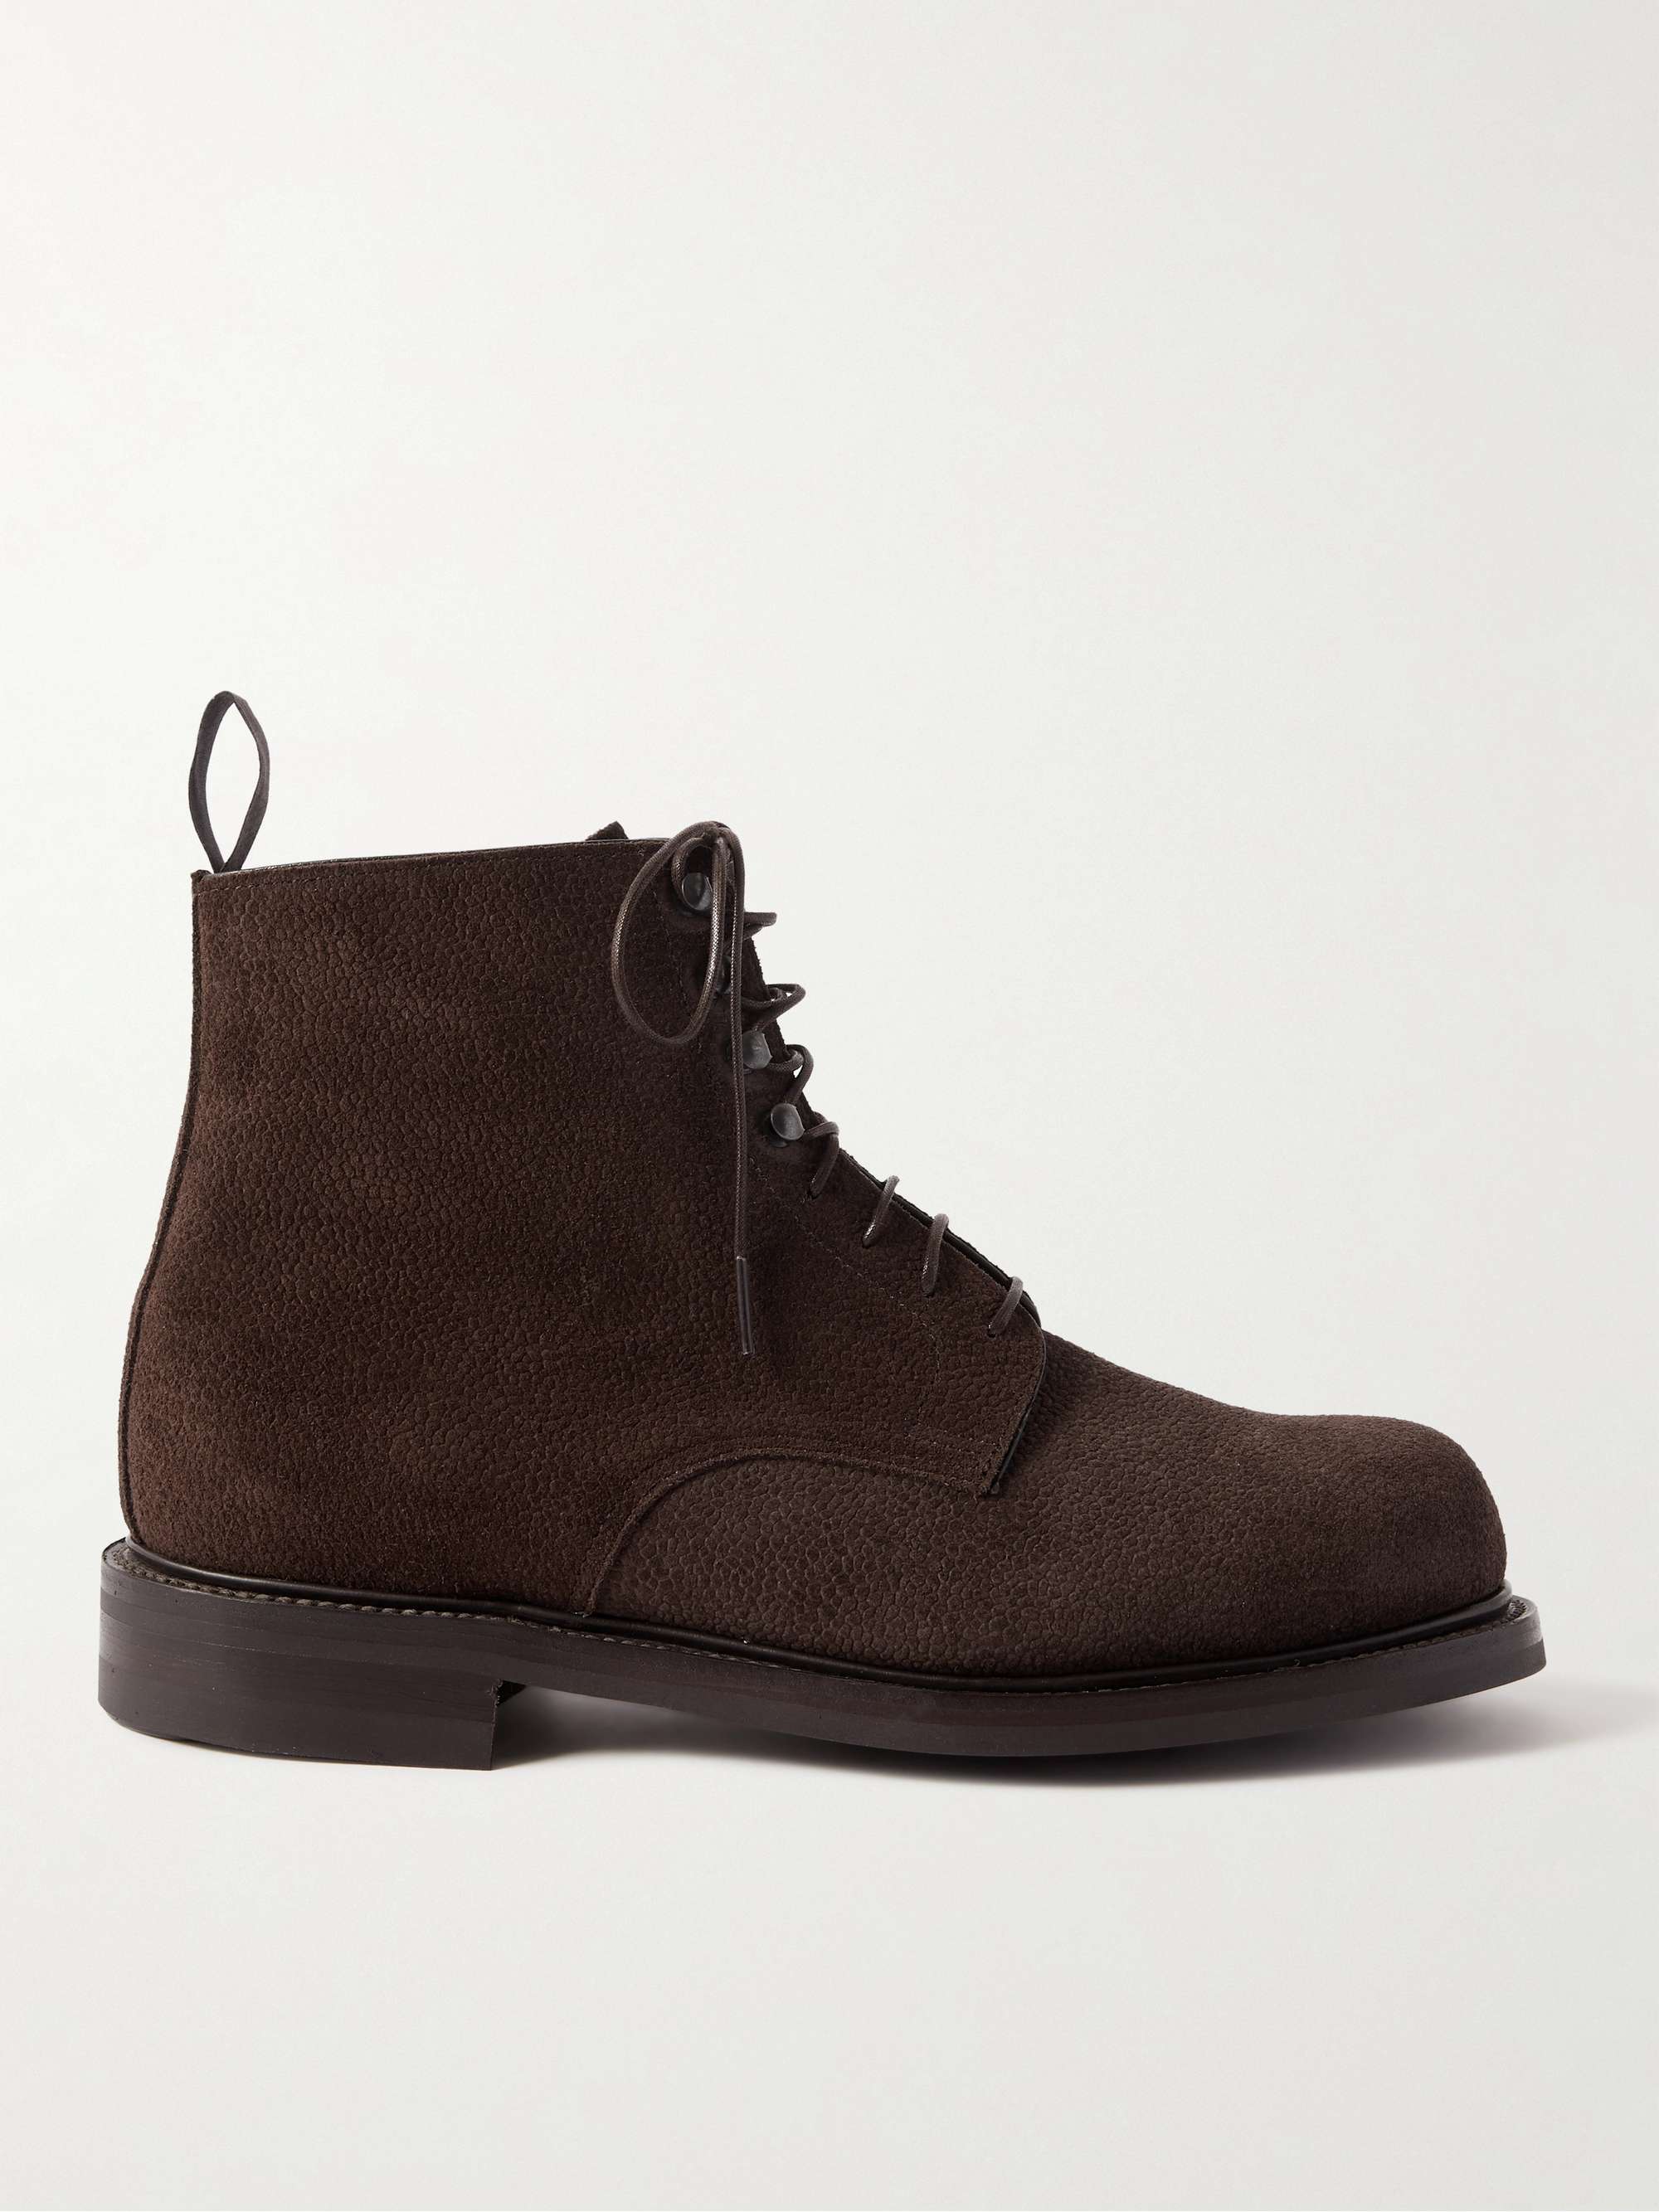 GEORGE CLEVERLEY Taron Pebble-Grain Suede Derby Boots